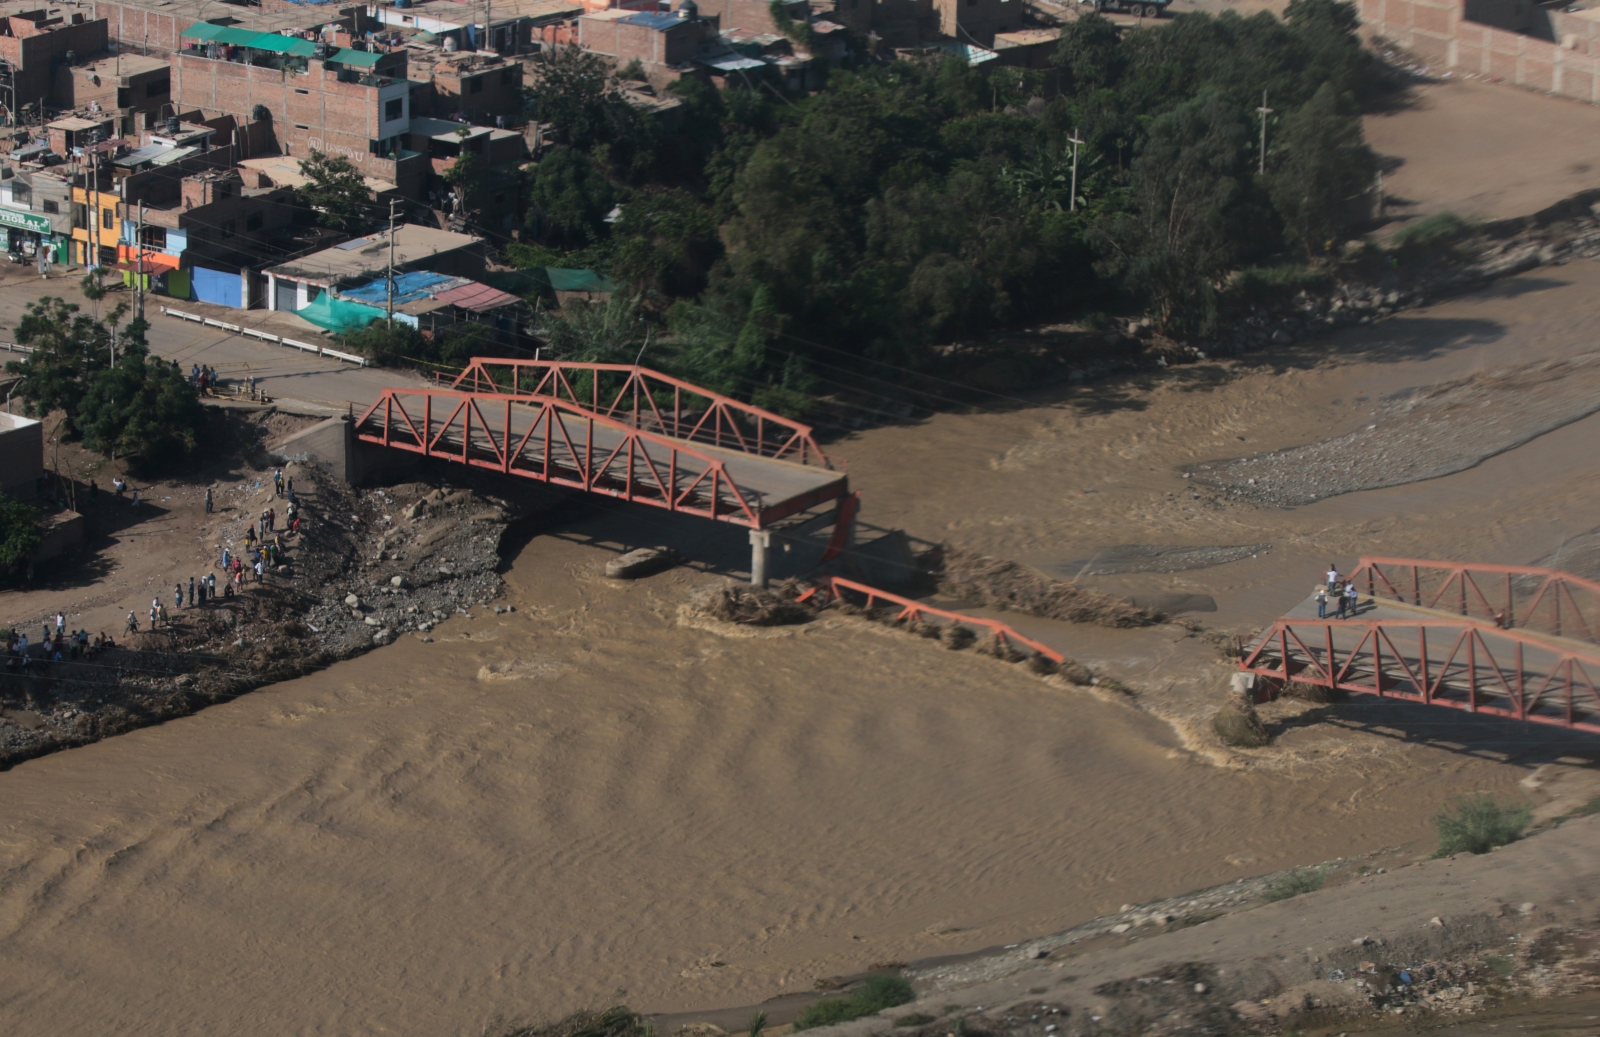 Powerful photos show the scale of the floods and landslides across Peru